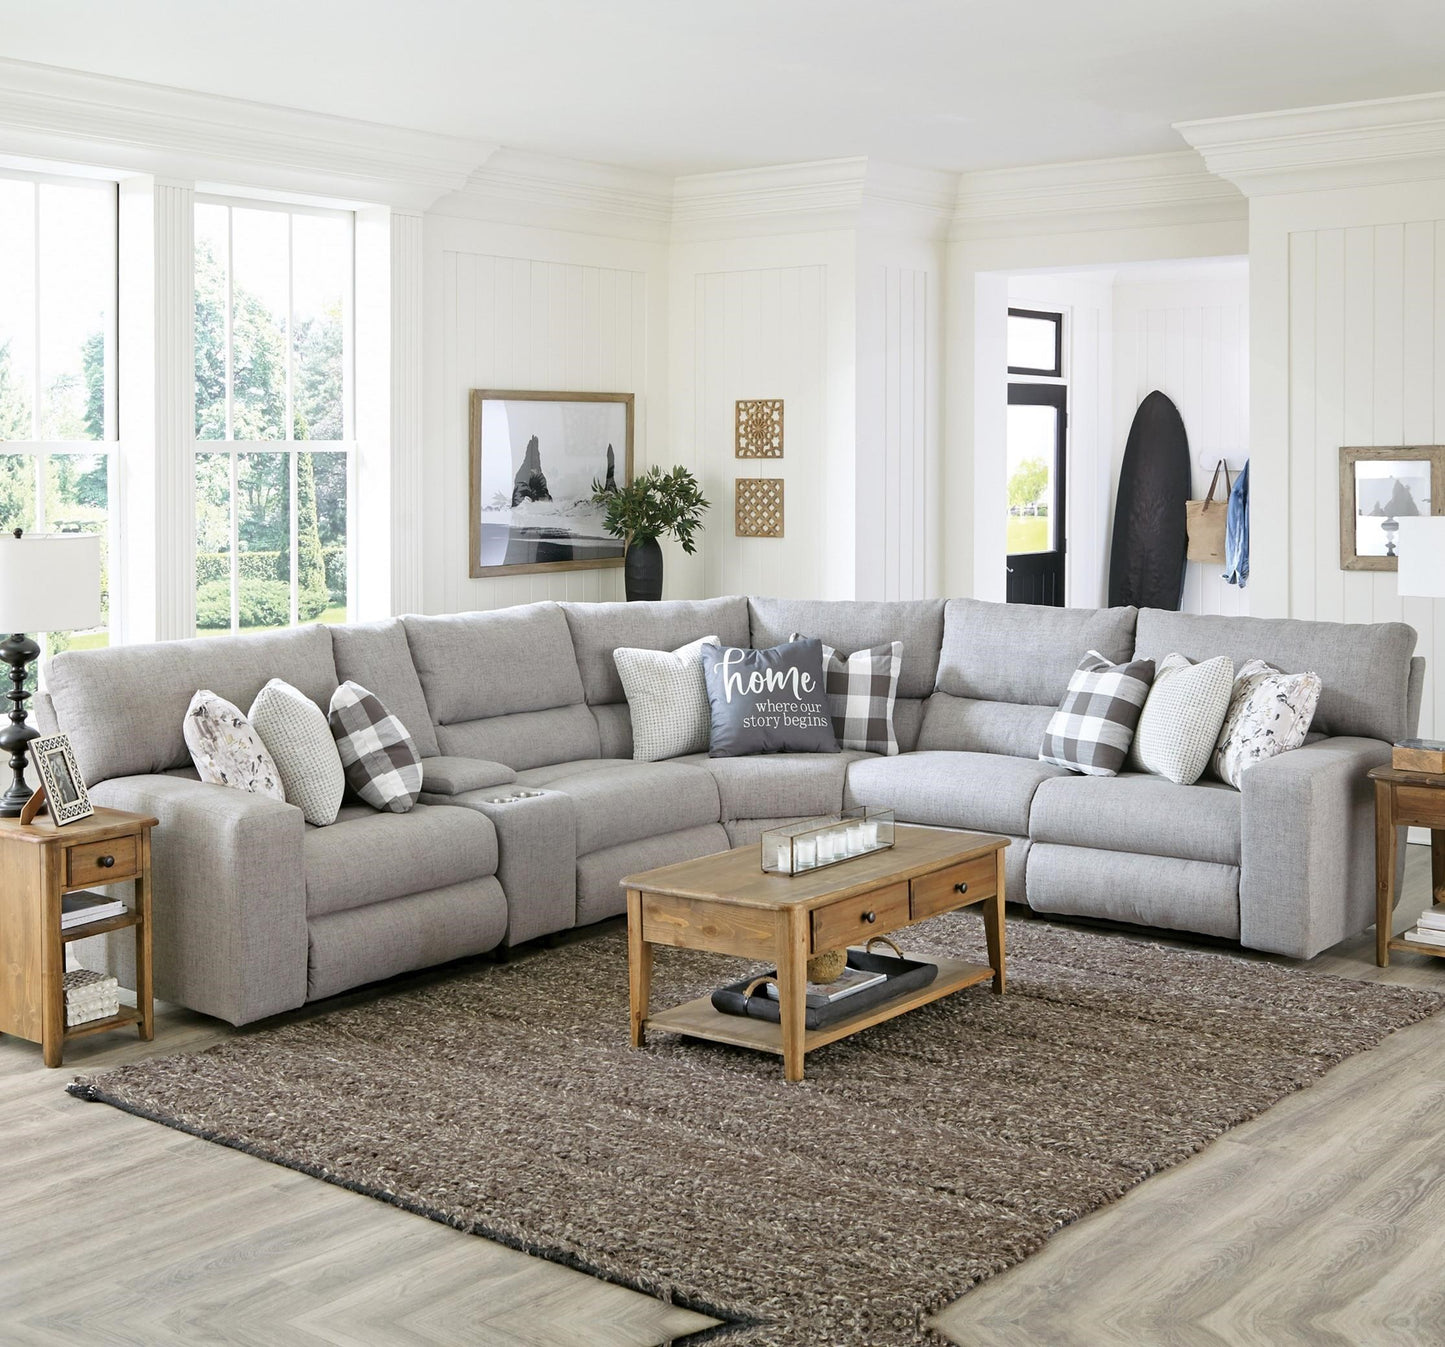 Our Story Begins Farmhouse Gray Sectional